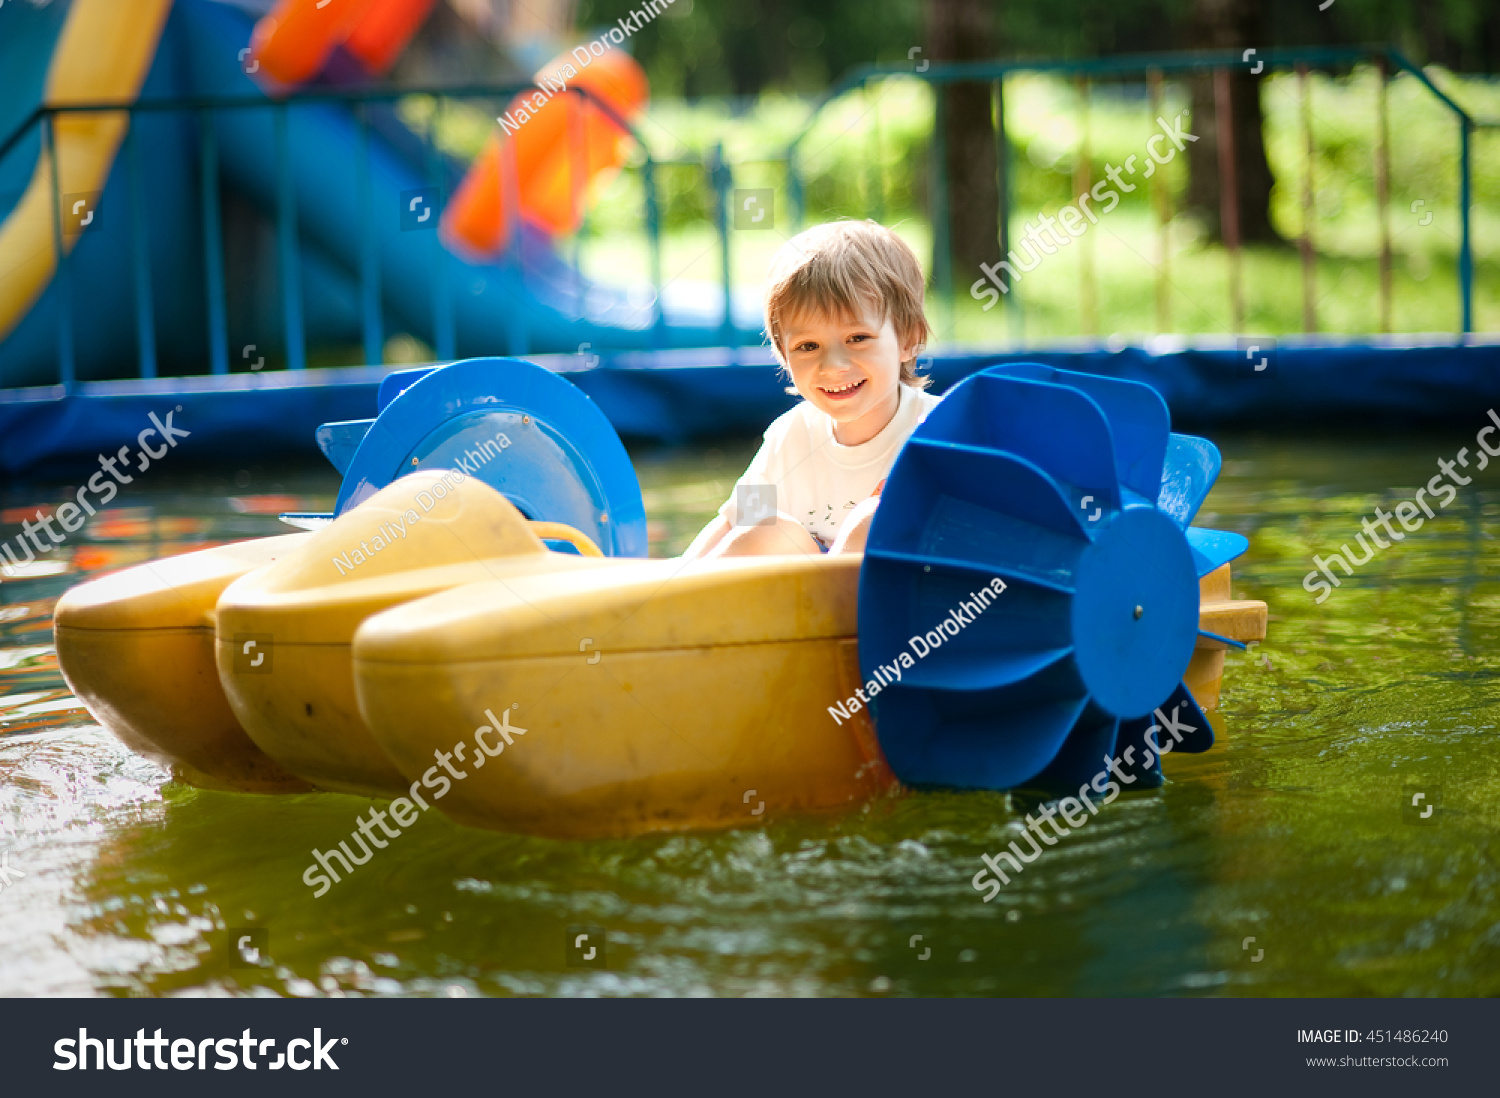 small child rides on a small catamaran in the pool #451486240